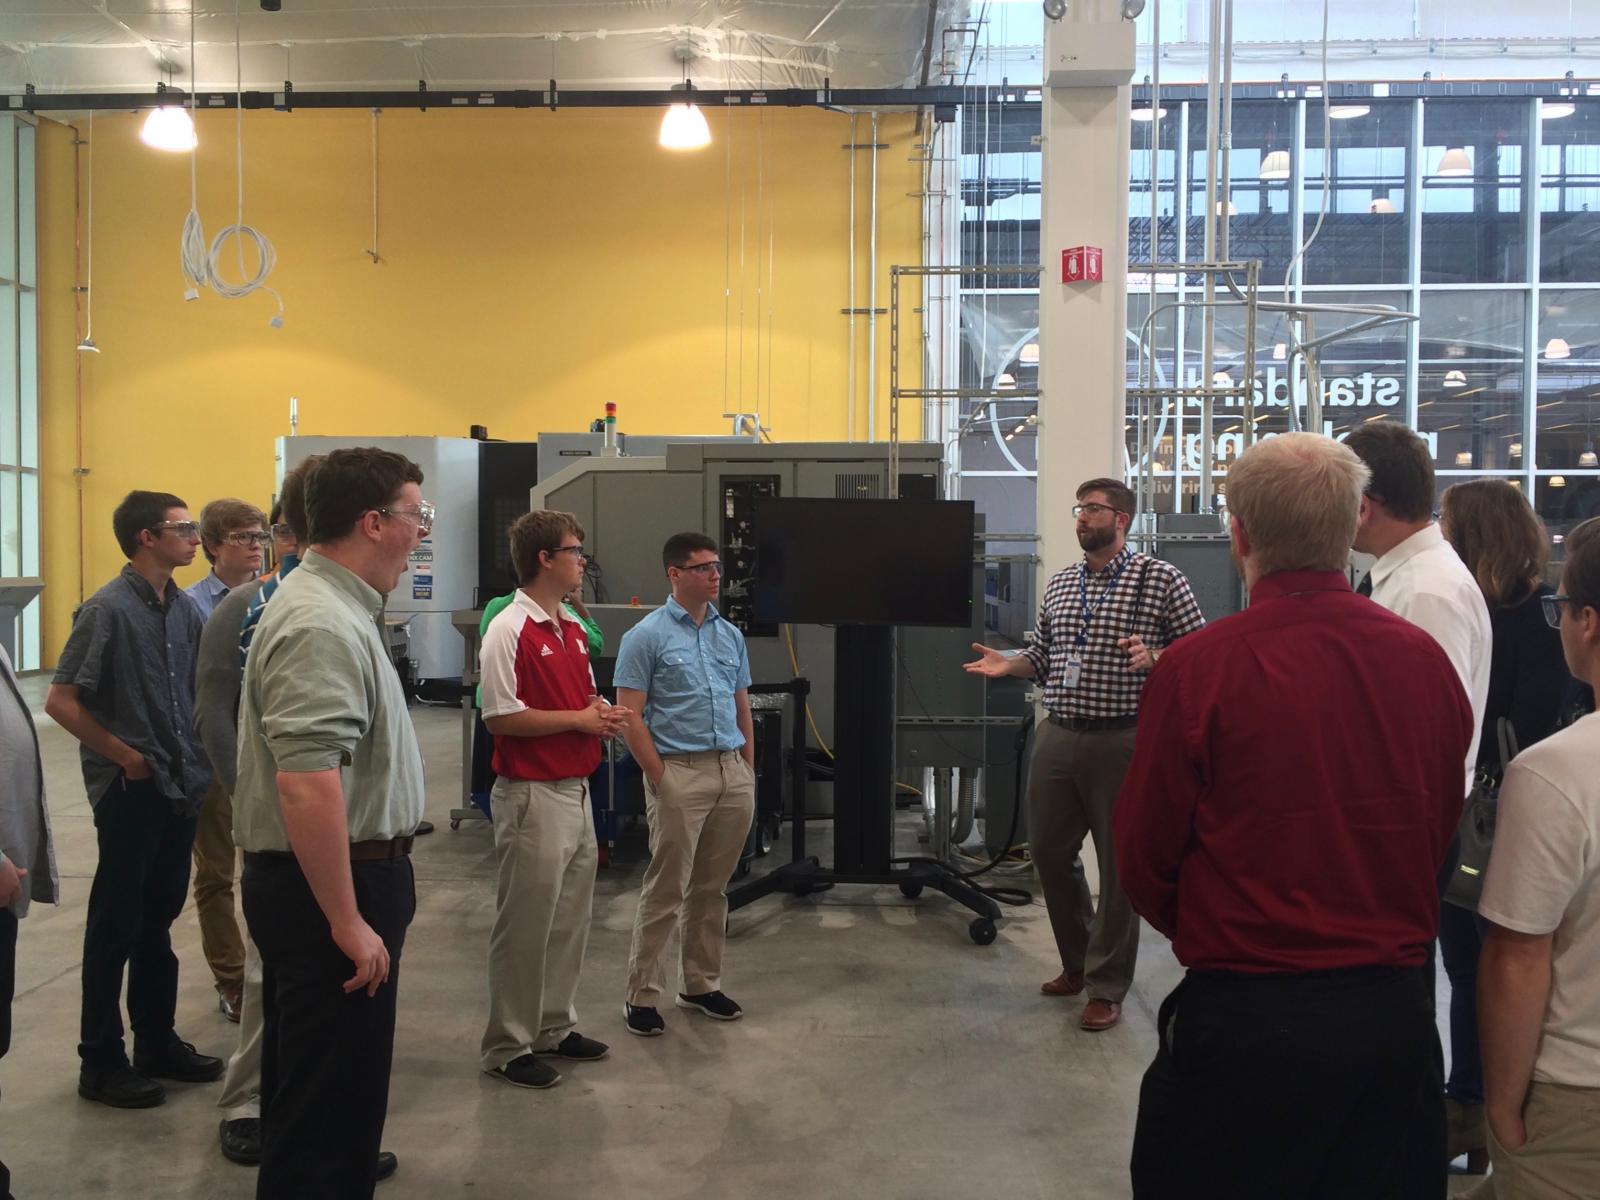 CSE Learning Community on a tour of UI Labs, a research organization and University of Nebraska–Lincoln partner.